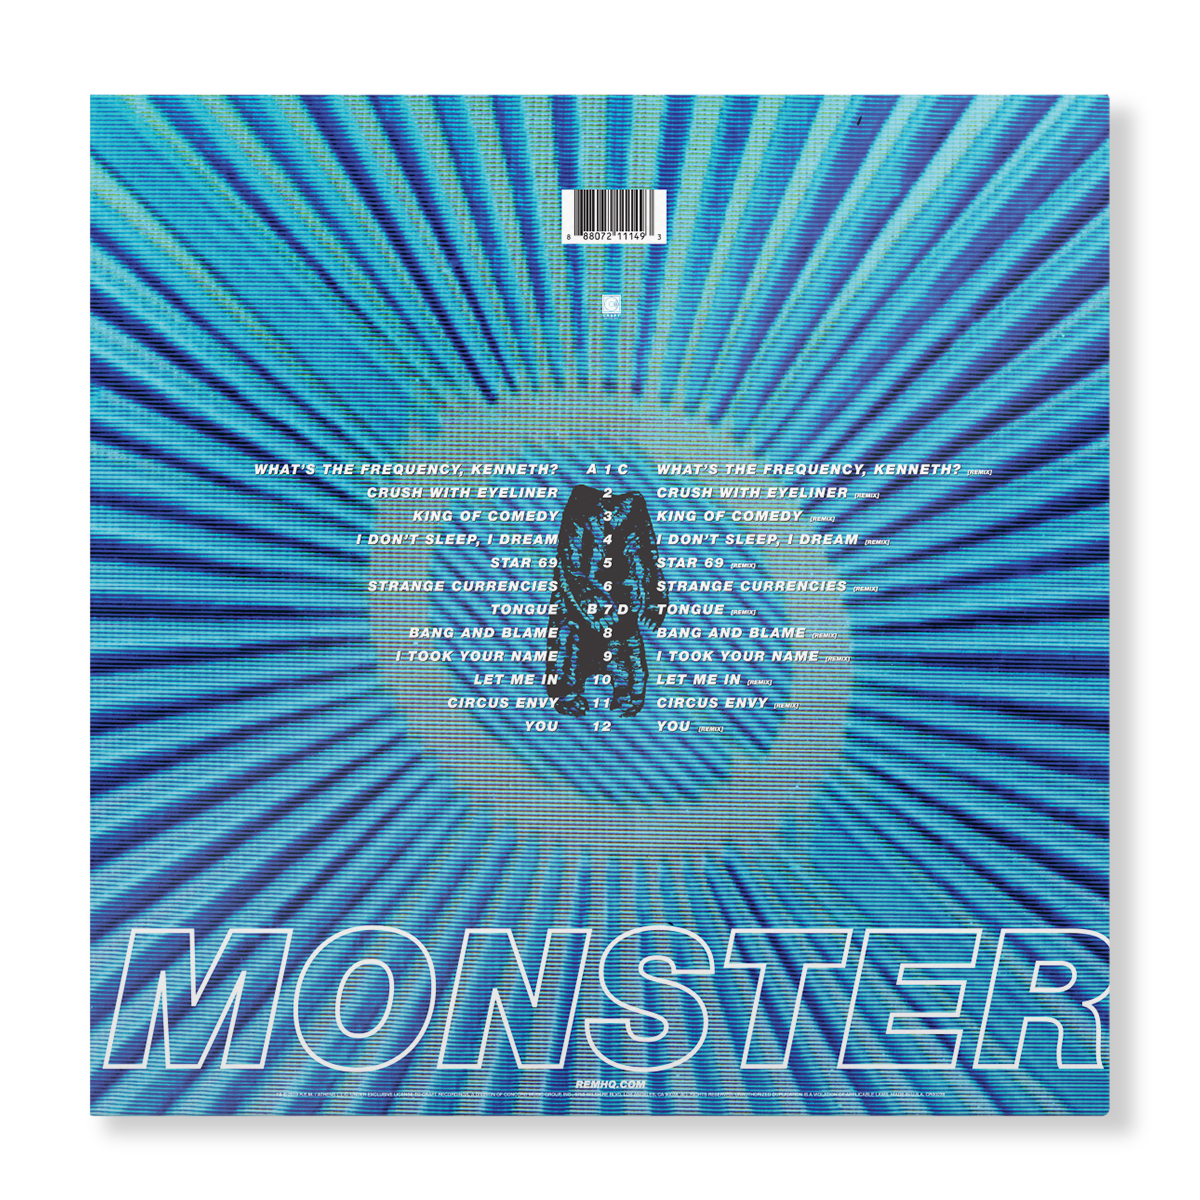 Monster 25th Anniversary - Expanded 2-LP Set - R.E.M.